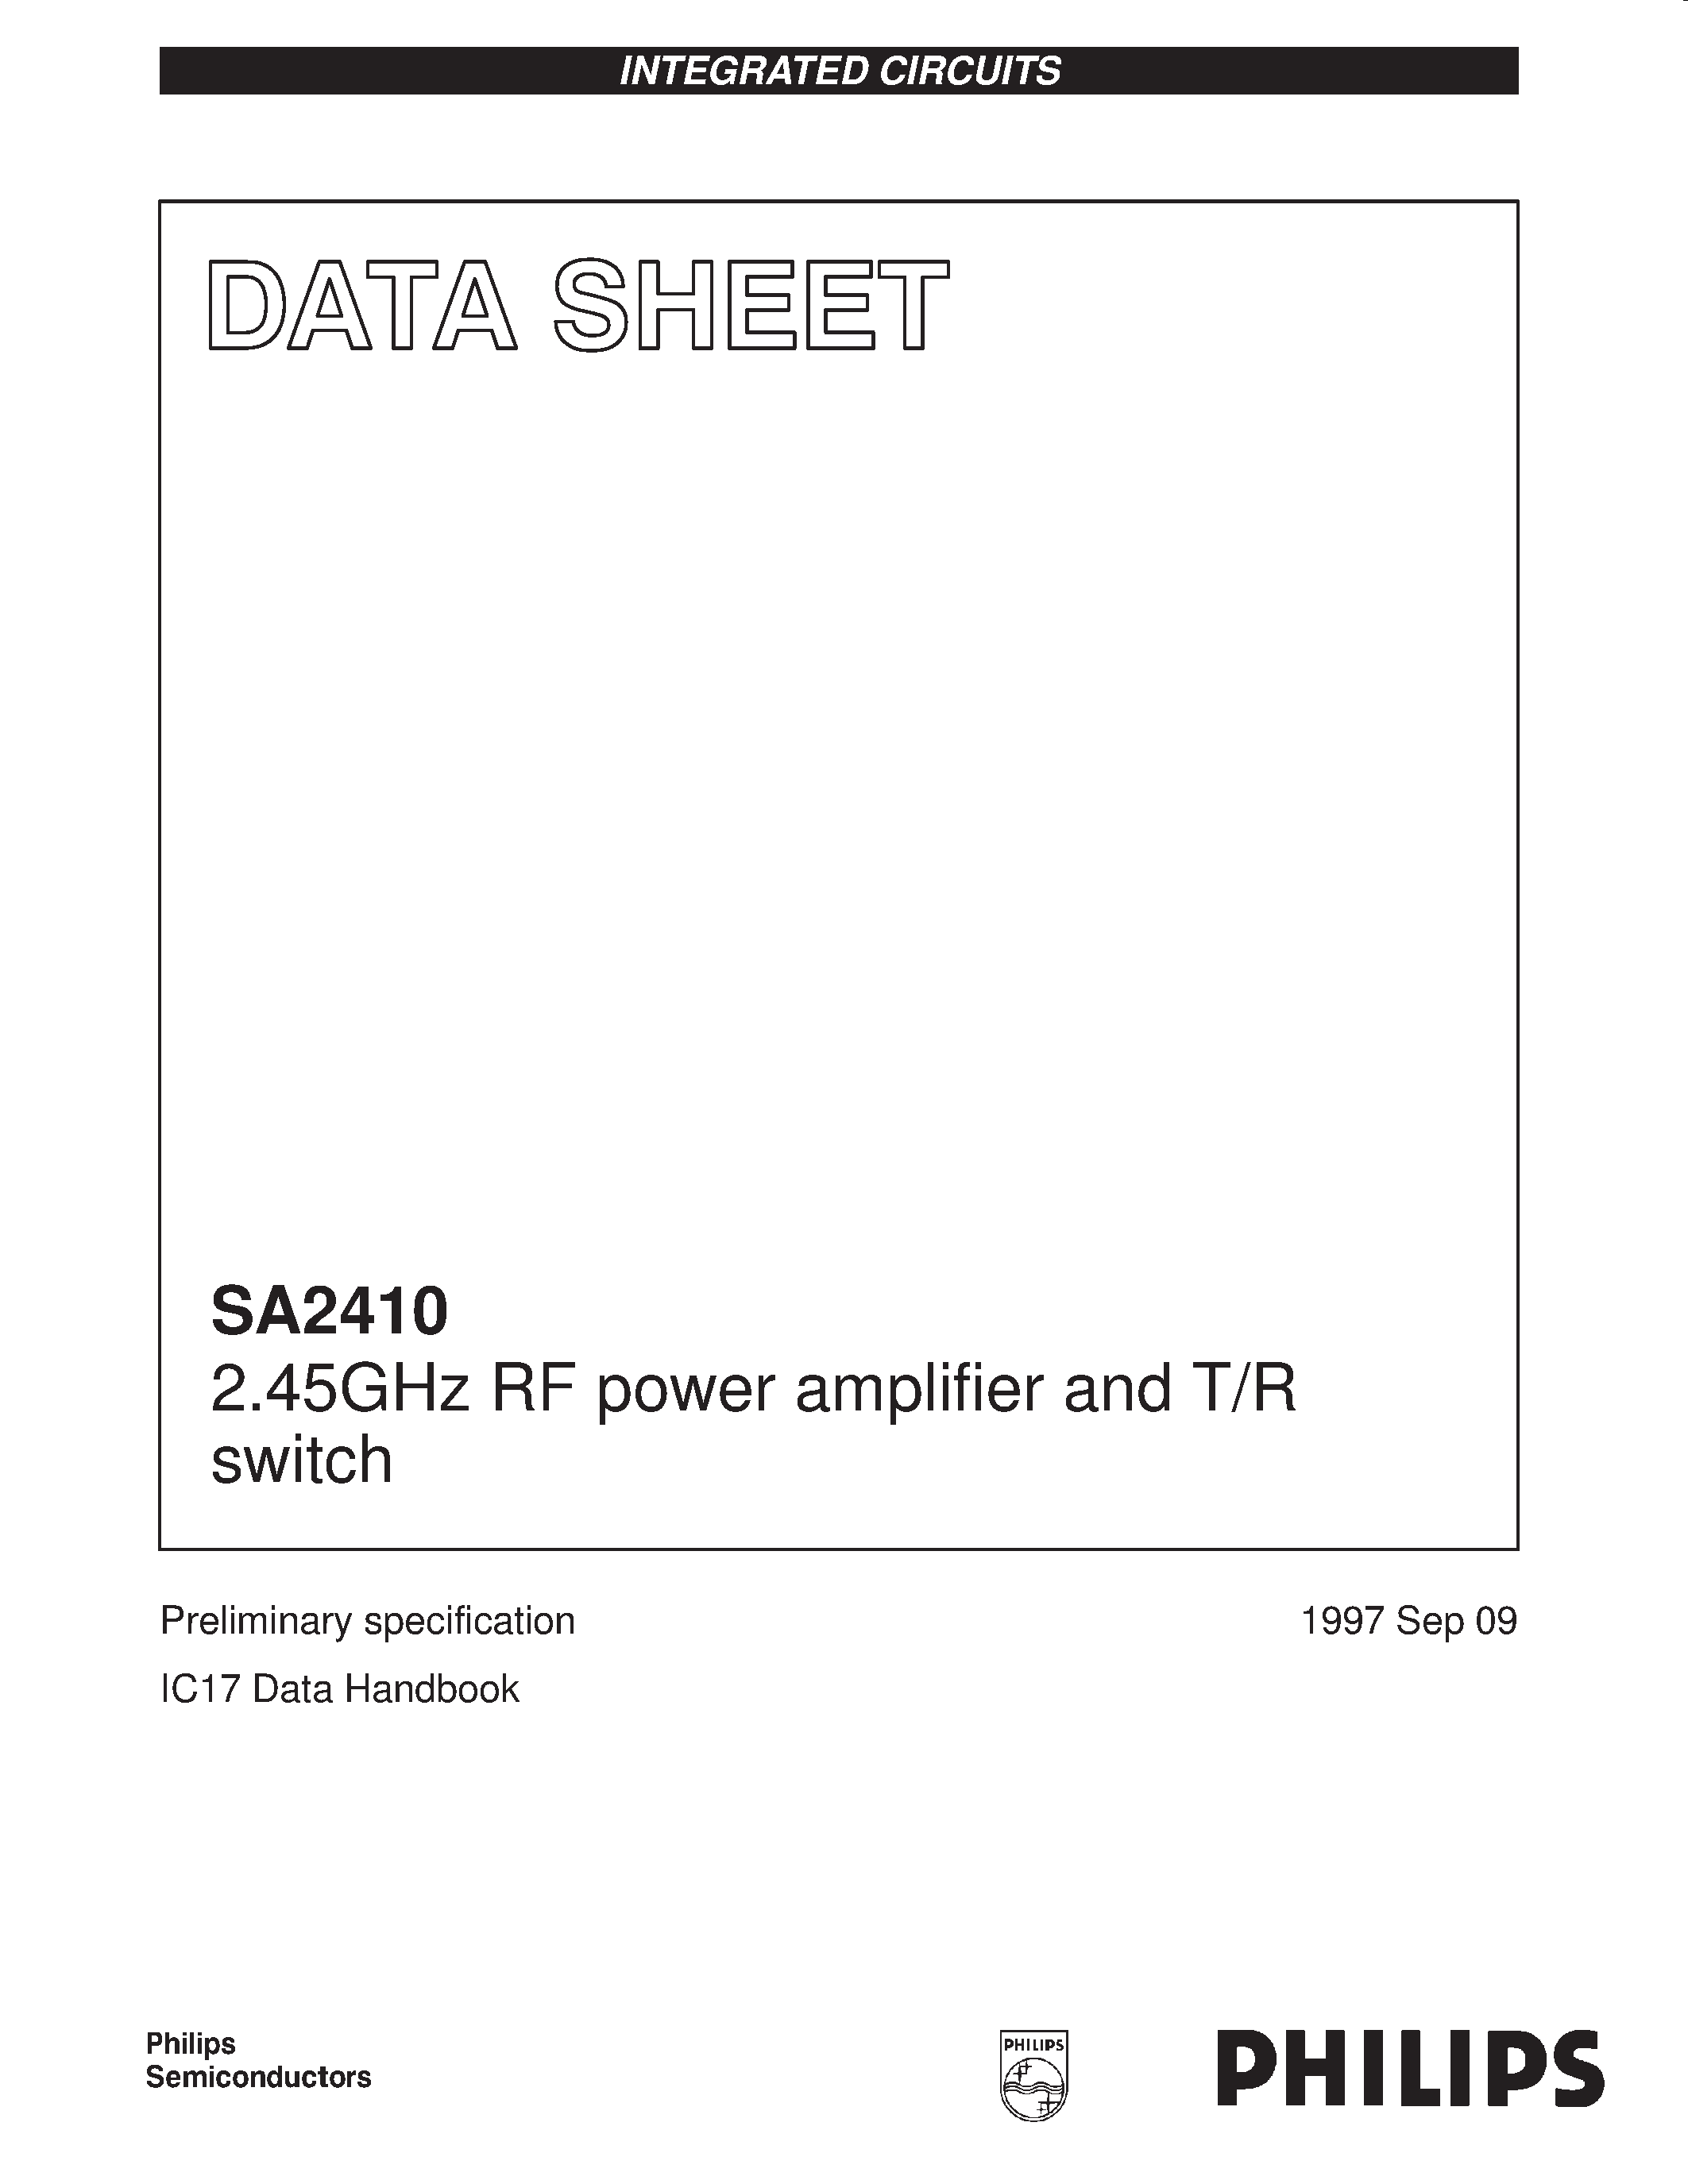 Даташит SA2410 - 2.45GHz RF power amplifier and T/R switch страница 1